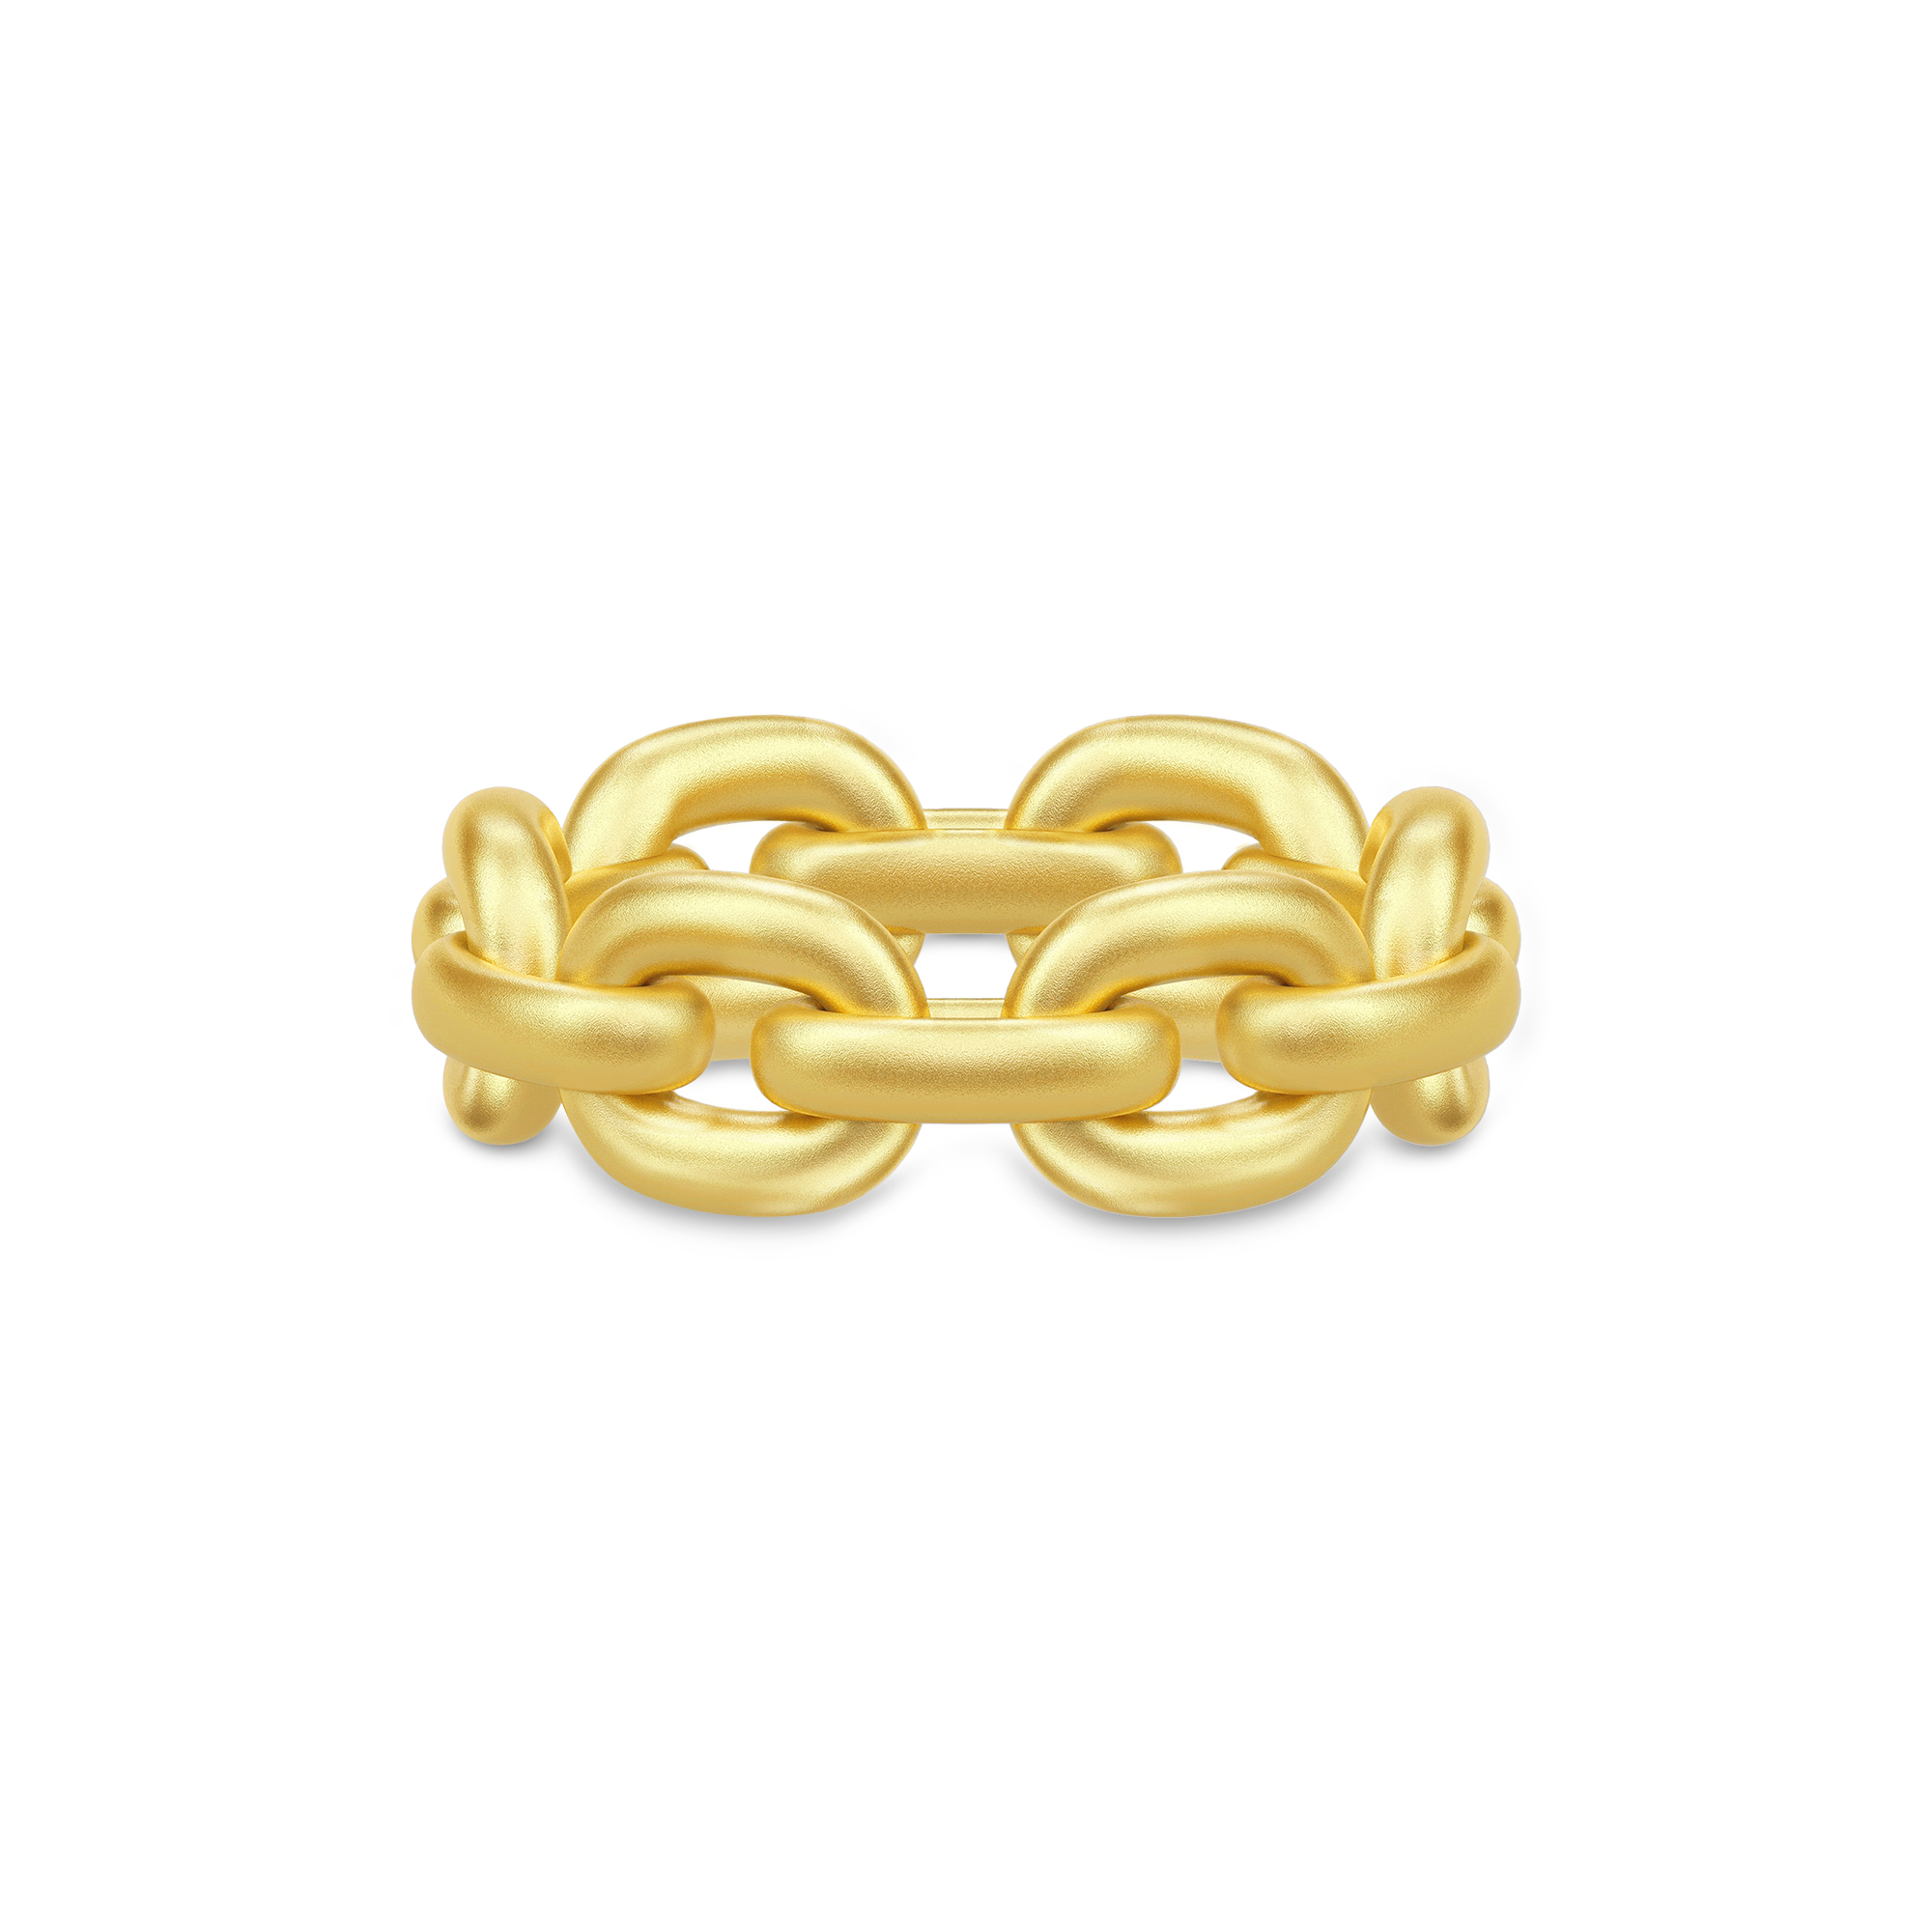  Link Chain Ring